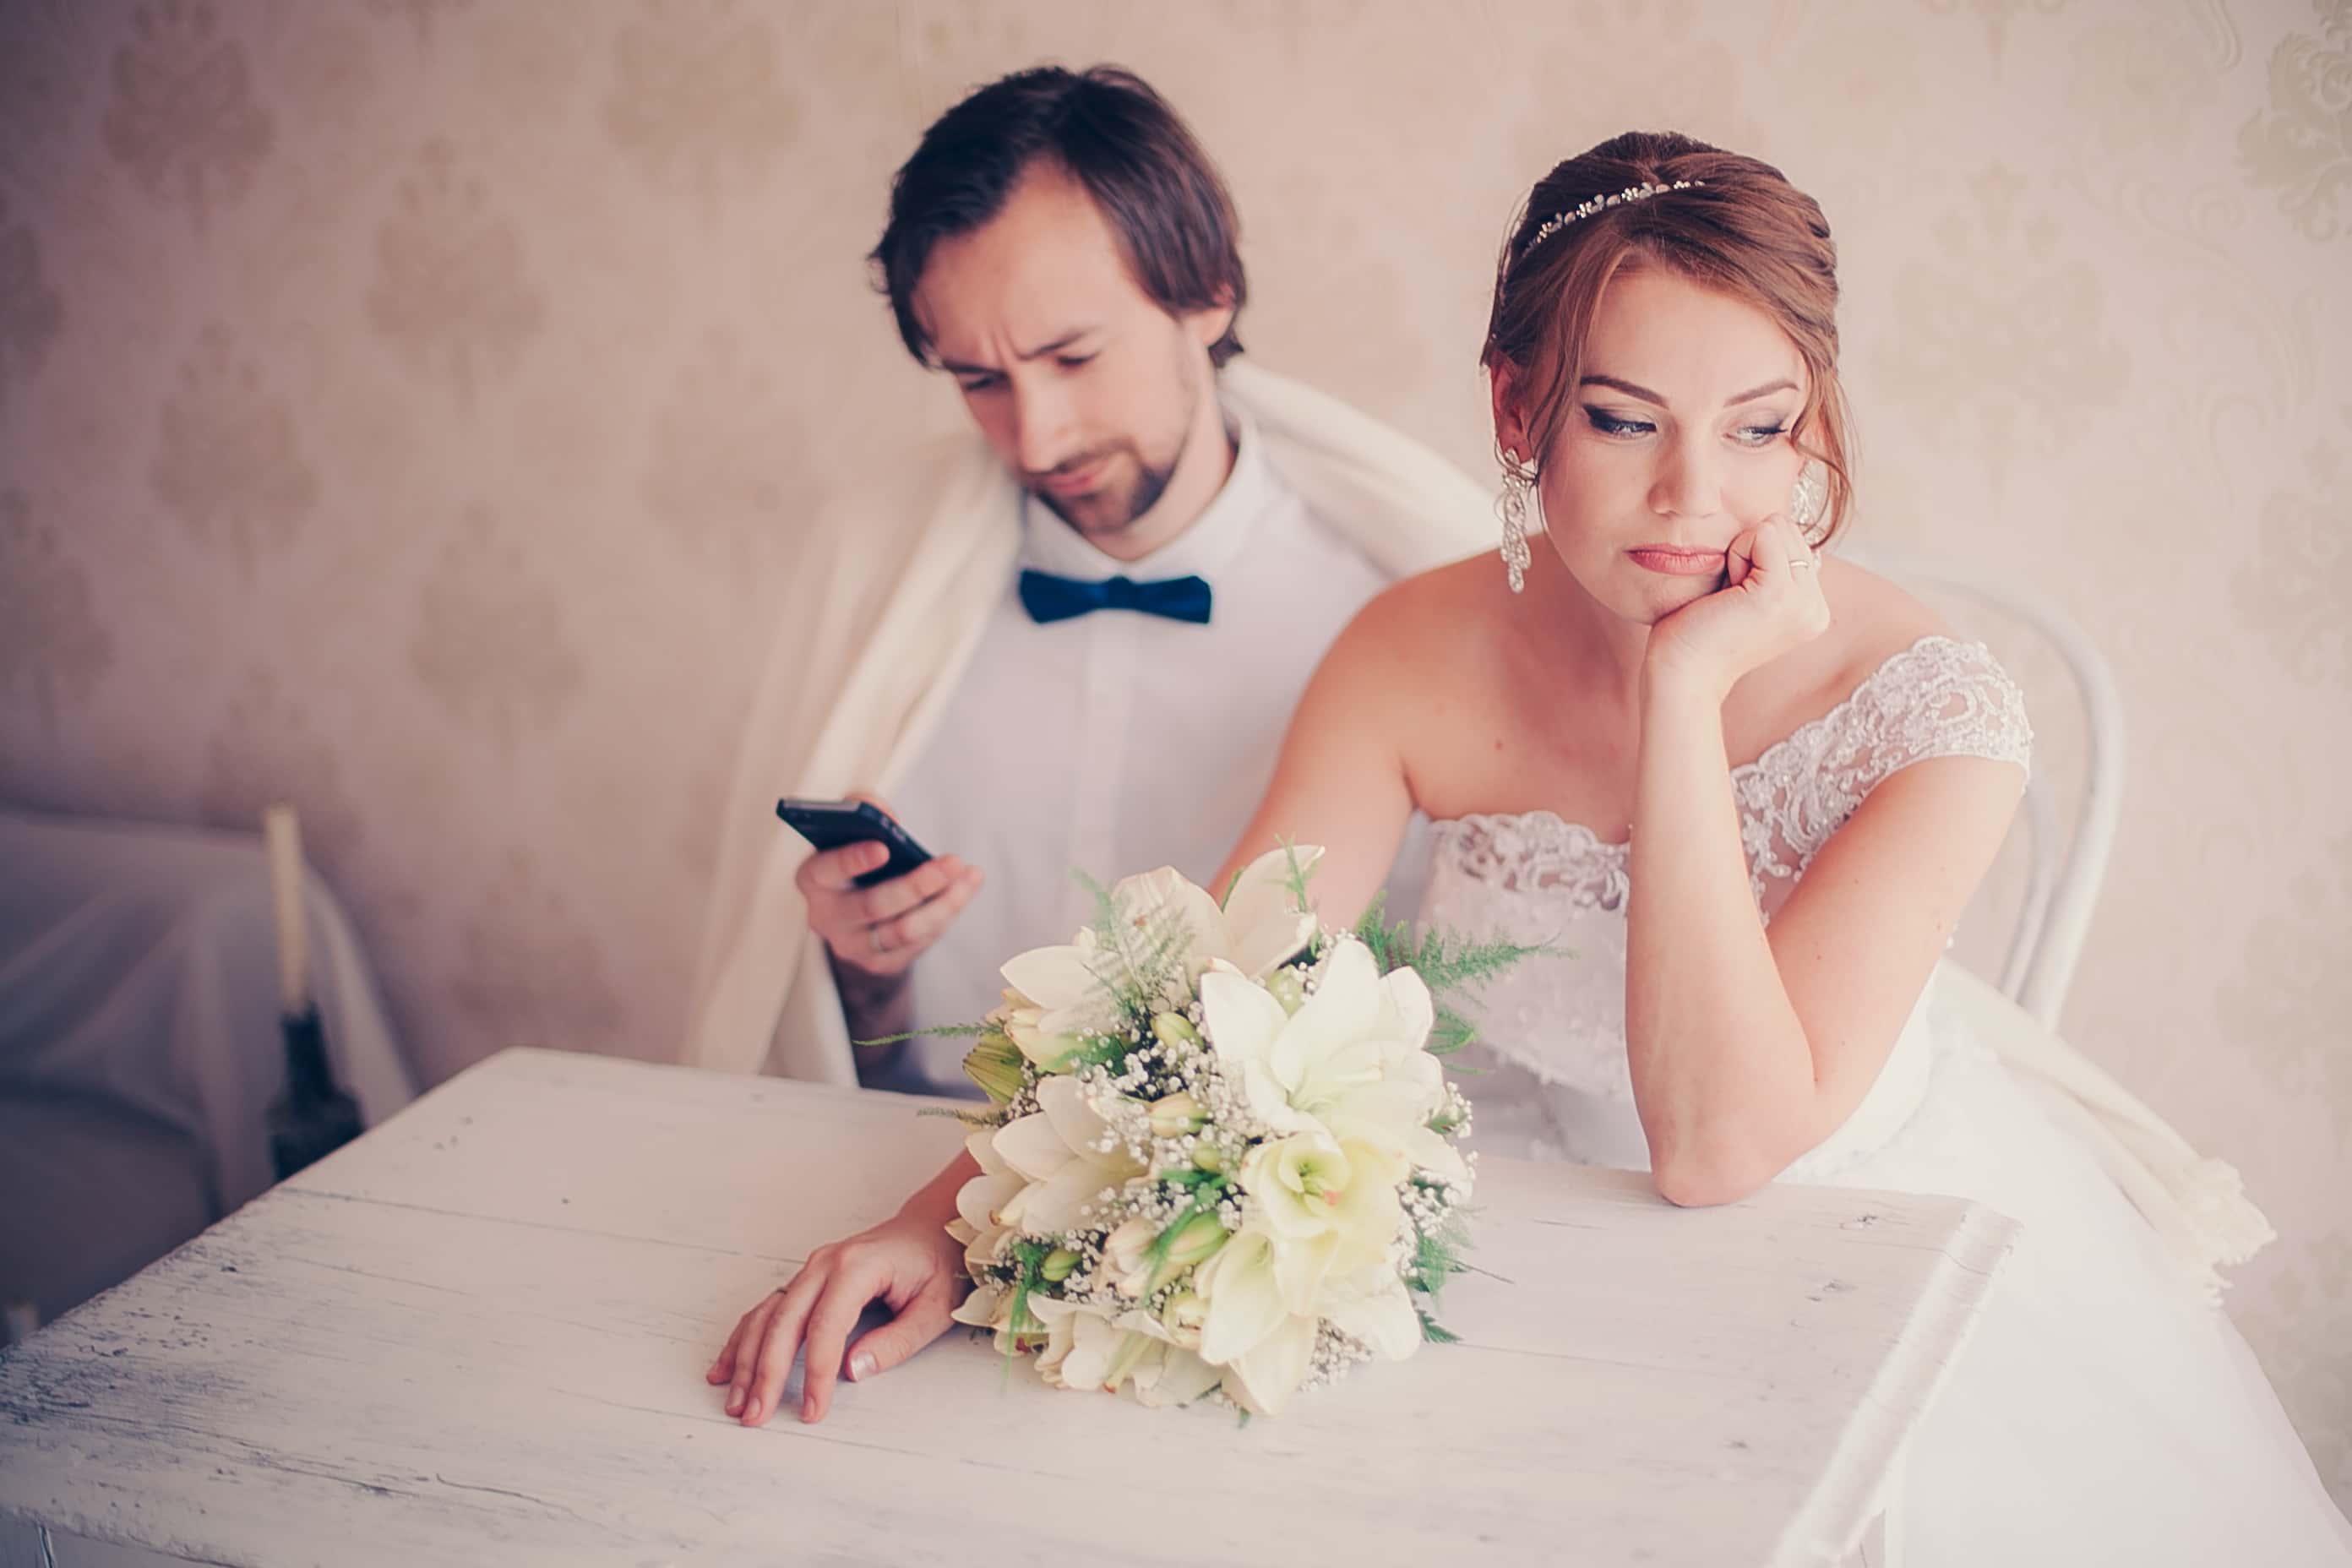 Wedding Guests Refused To Hold Their Peace facts